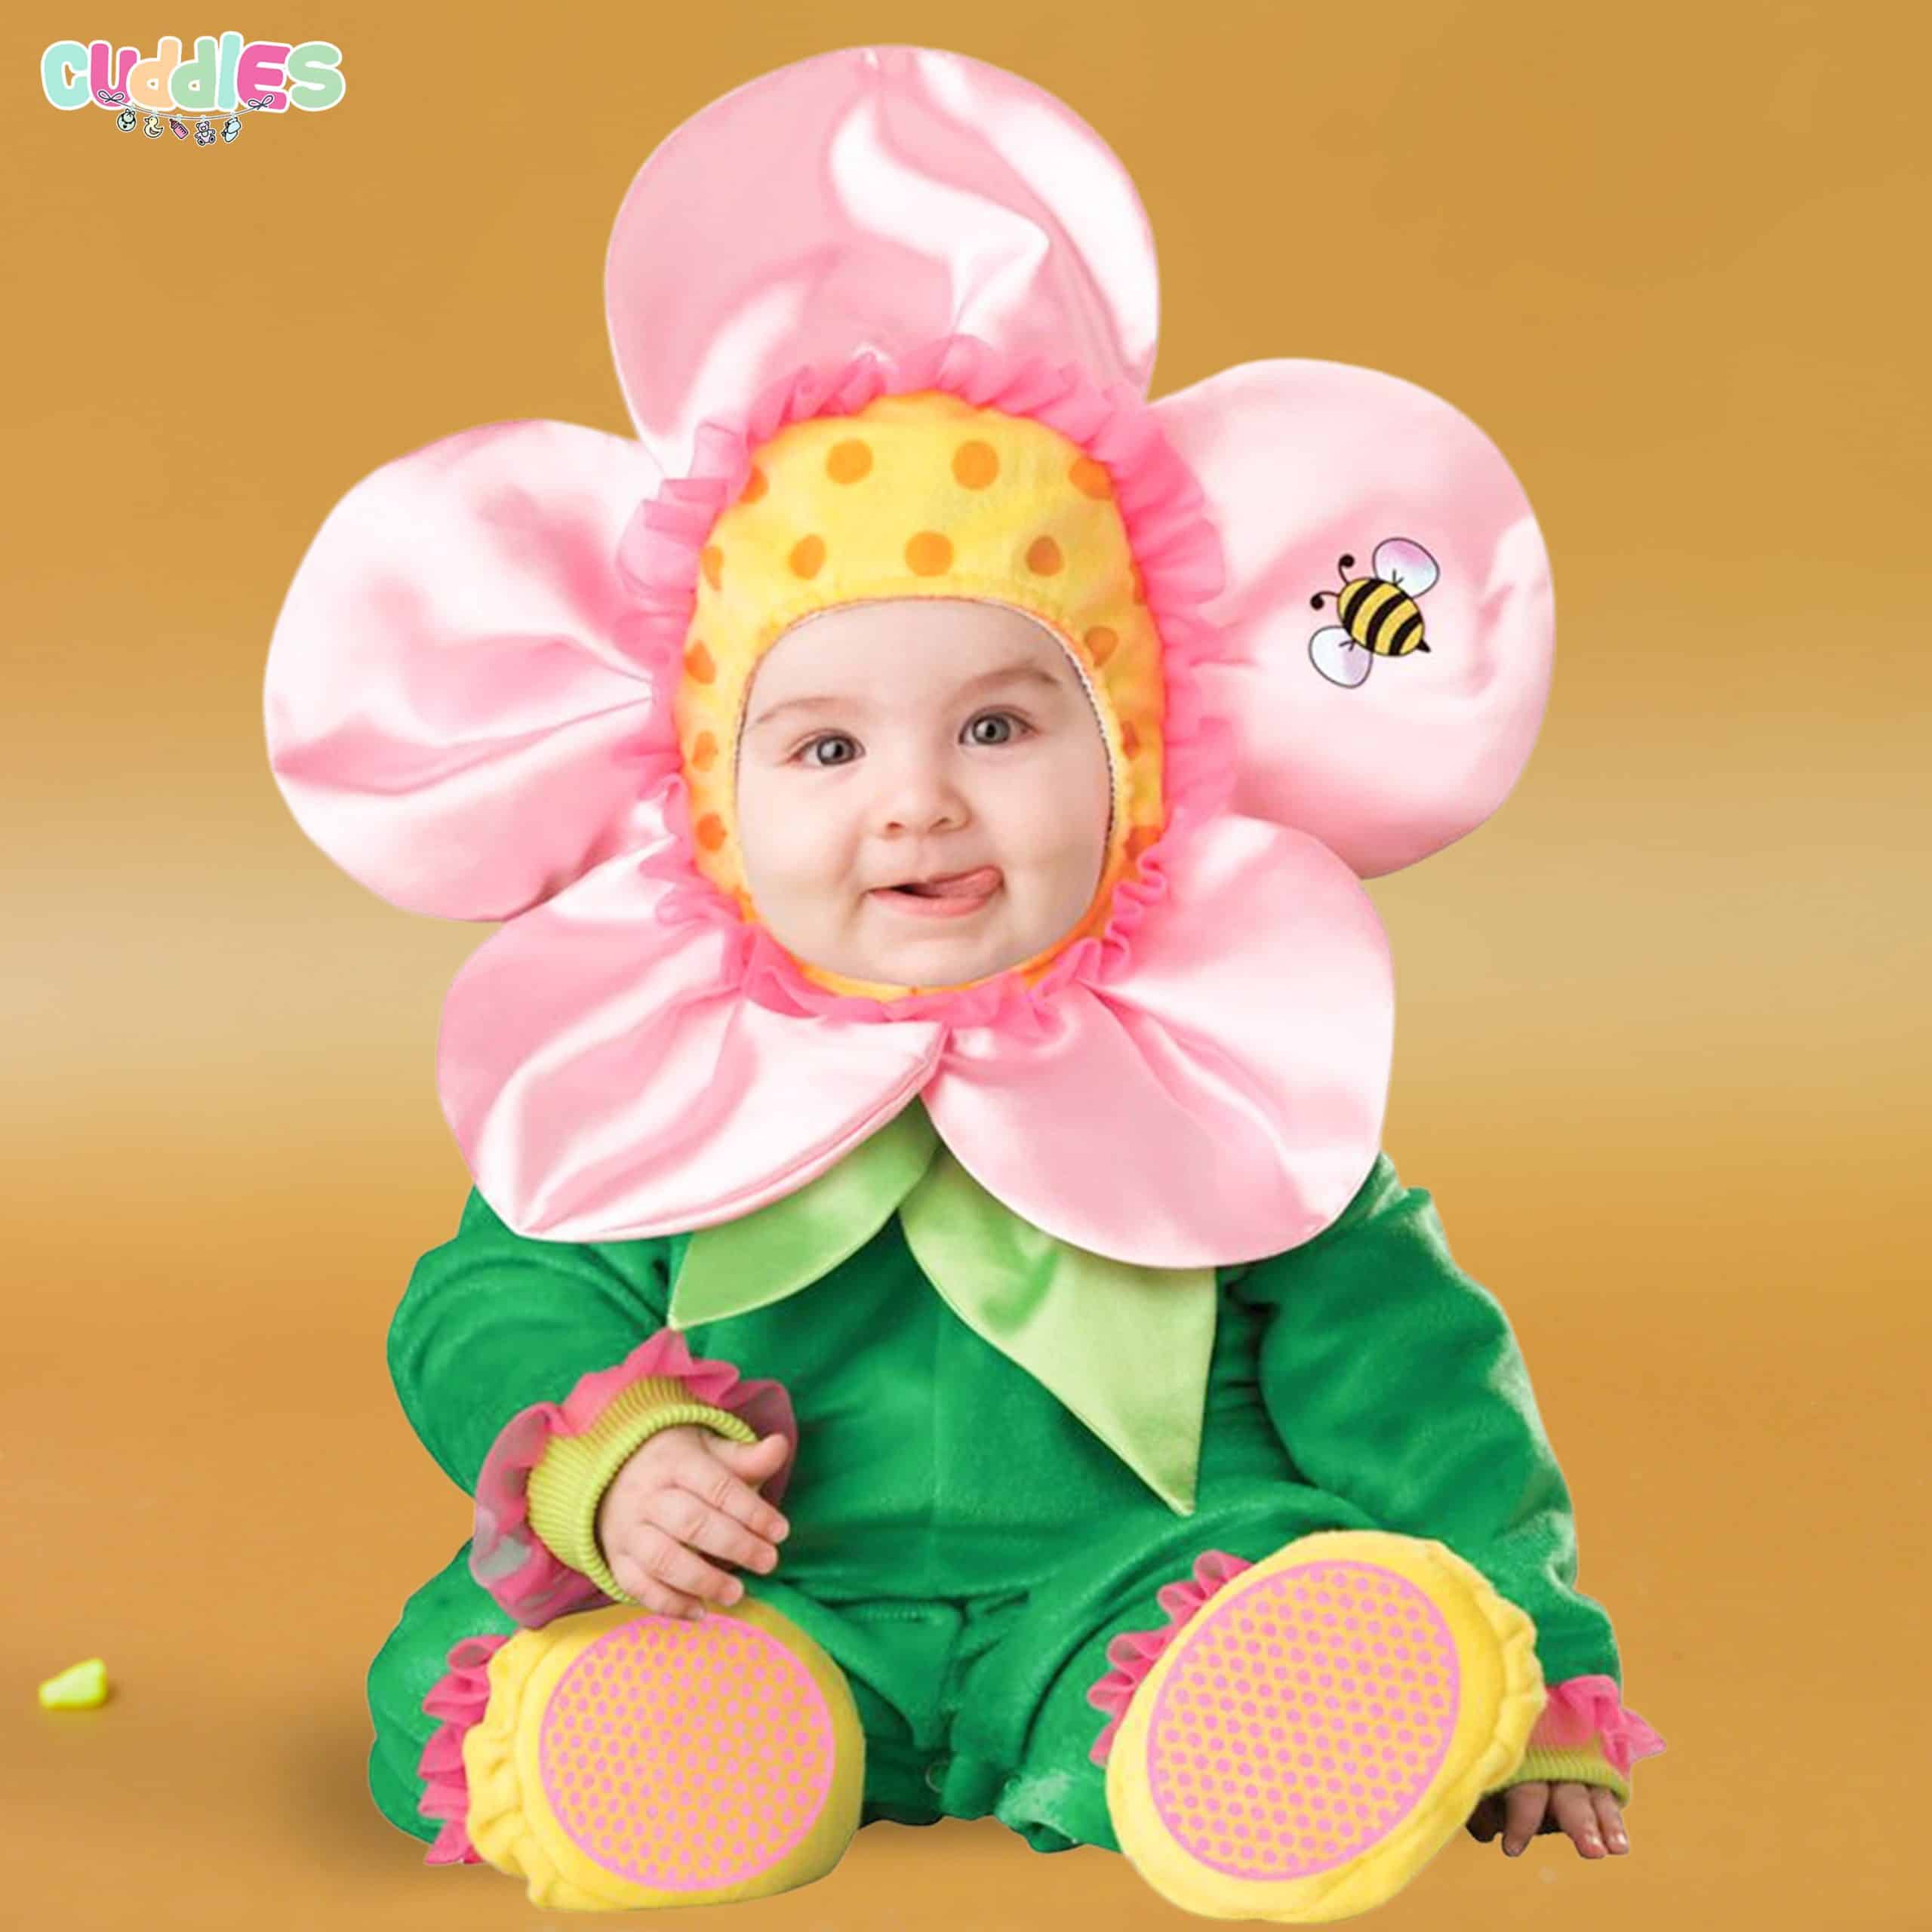 Flower Costume - The Cuddles Store